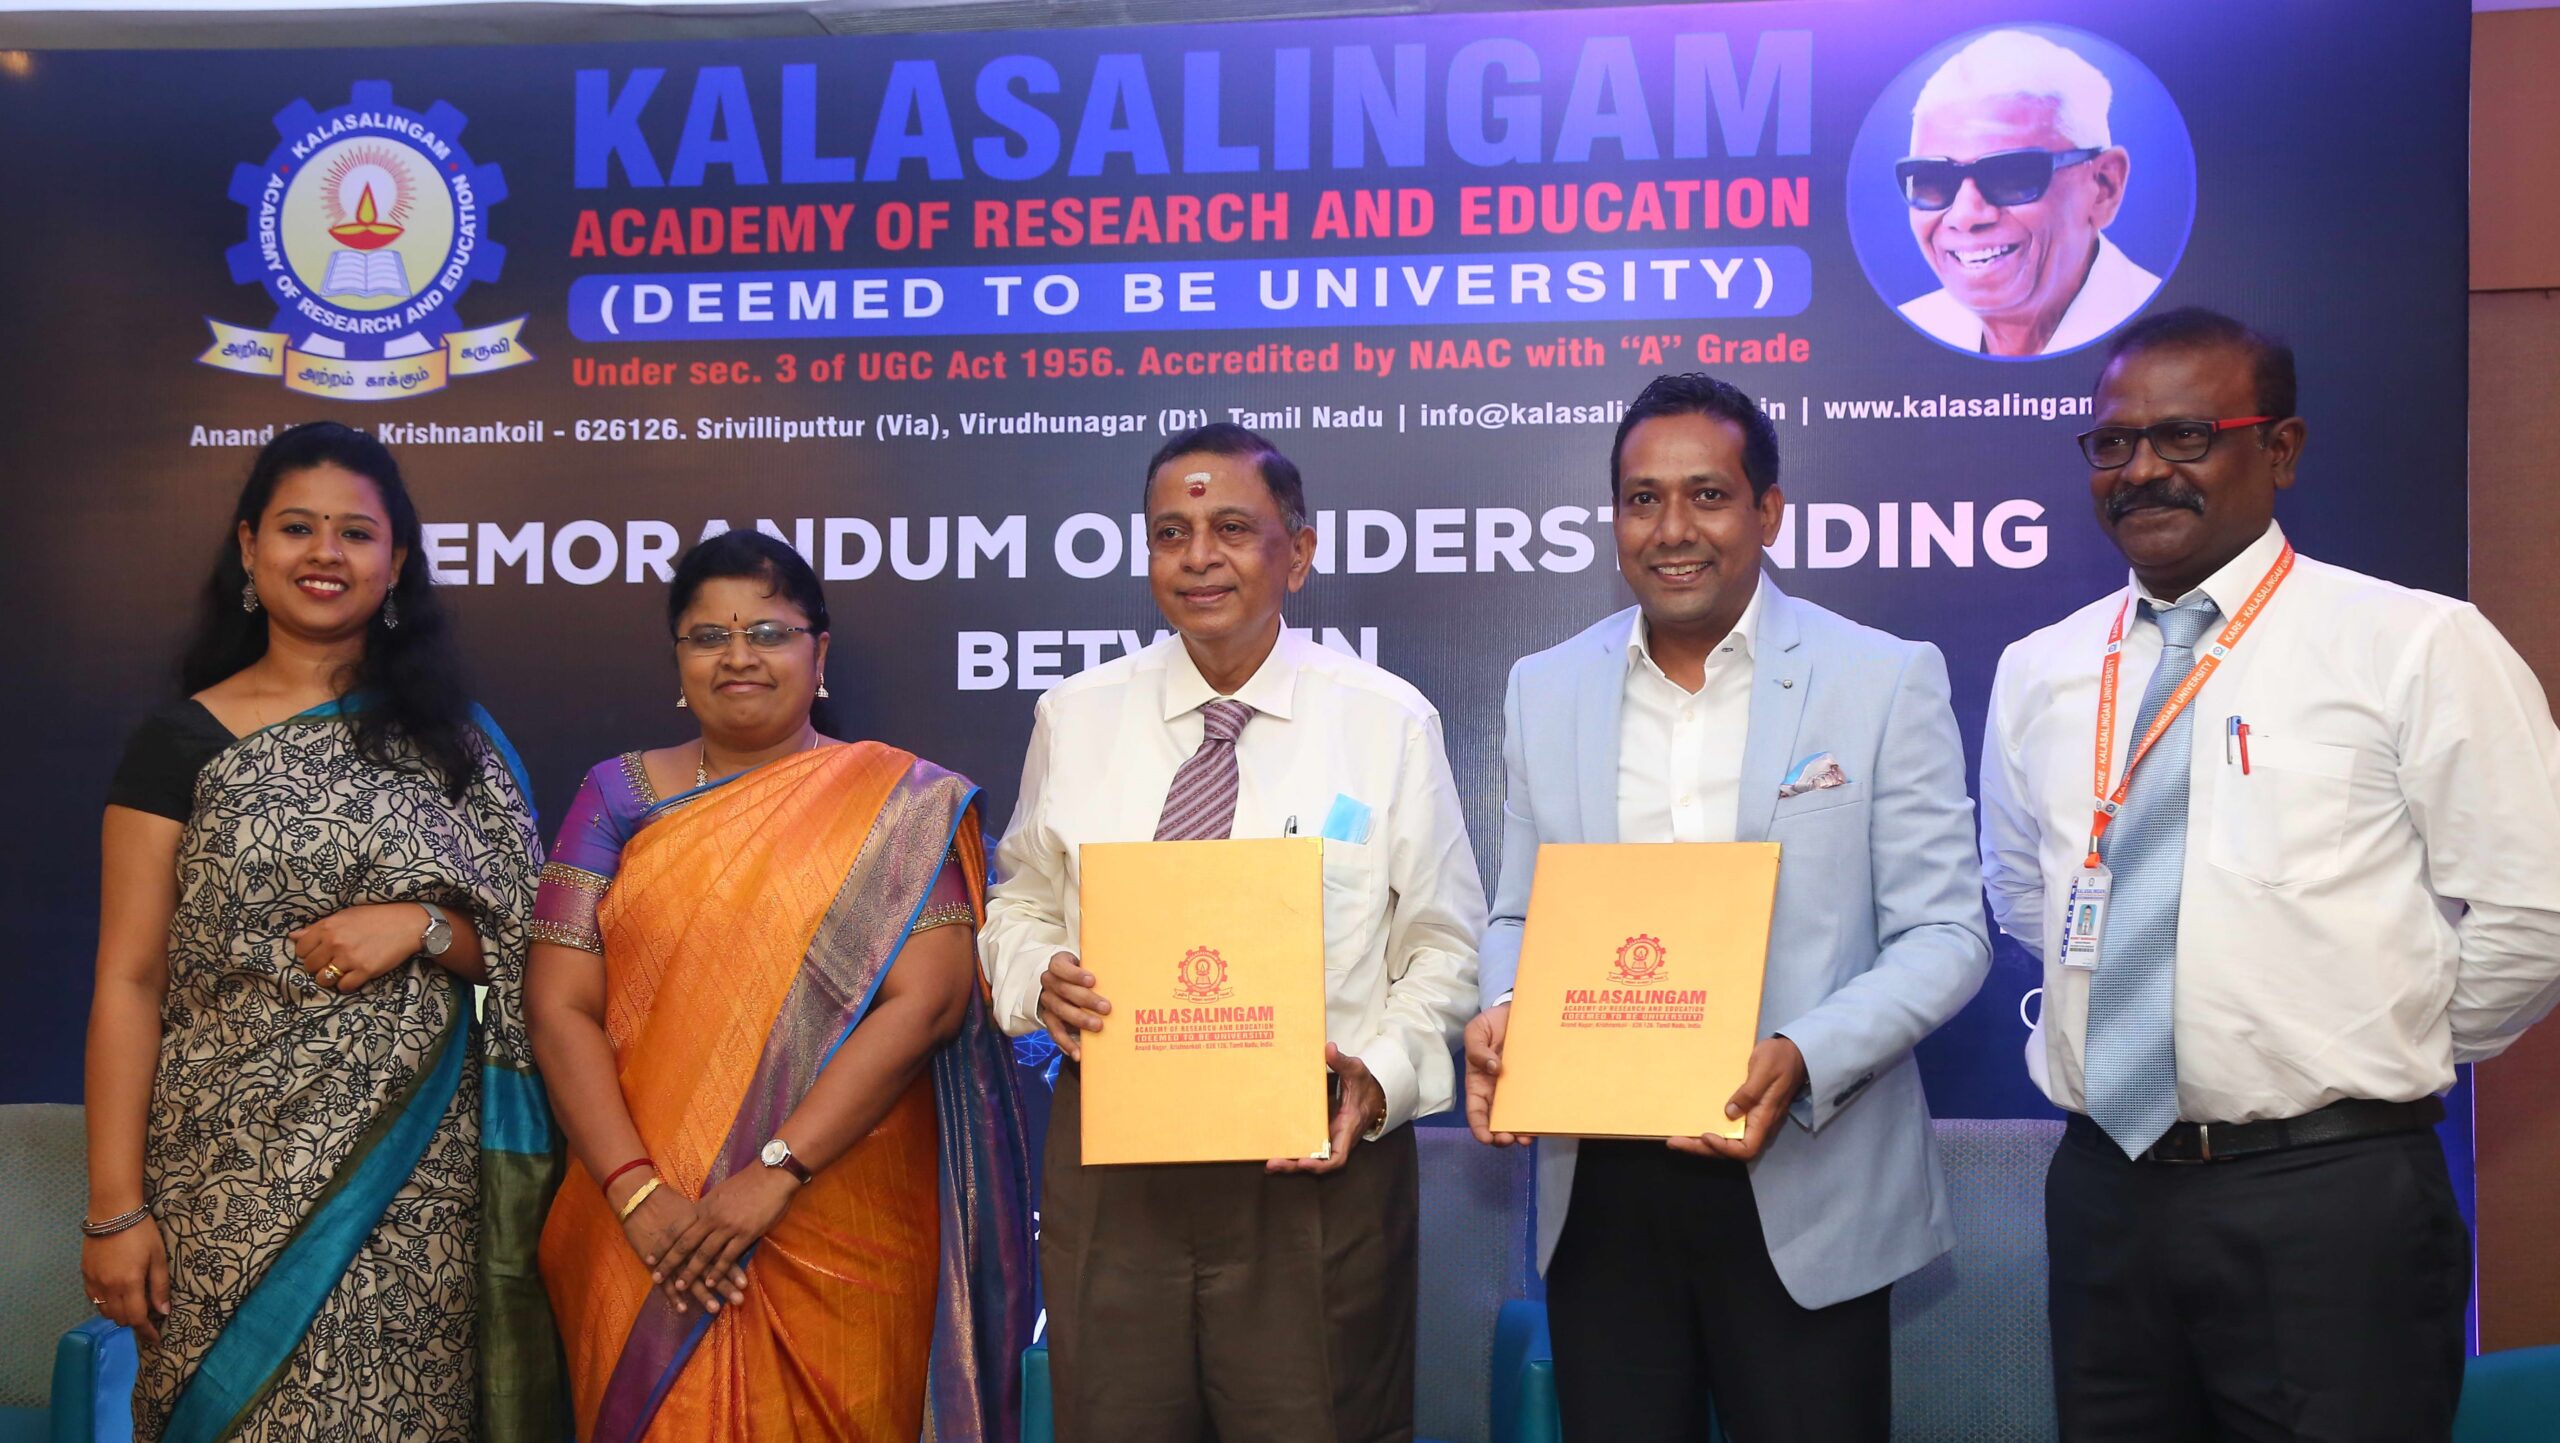 Kalasalingam Academy of Research and Education & Courtyard by Marriott Chennai signs MoU to amplify the experience of hospitality education and training